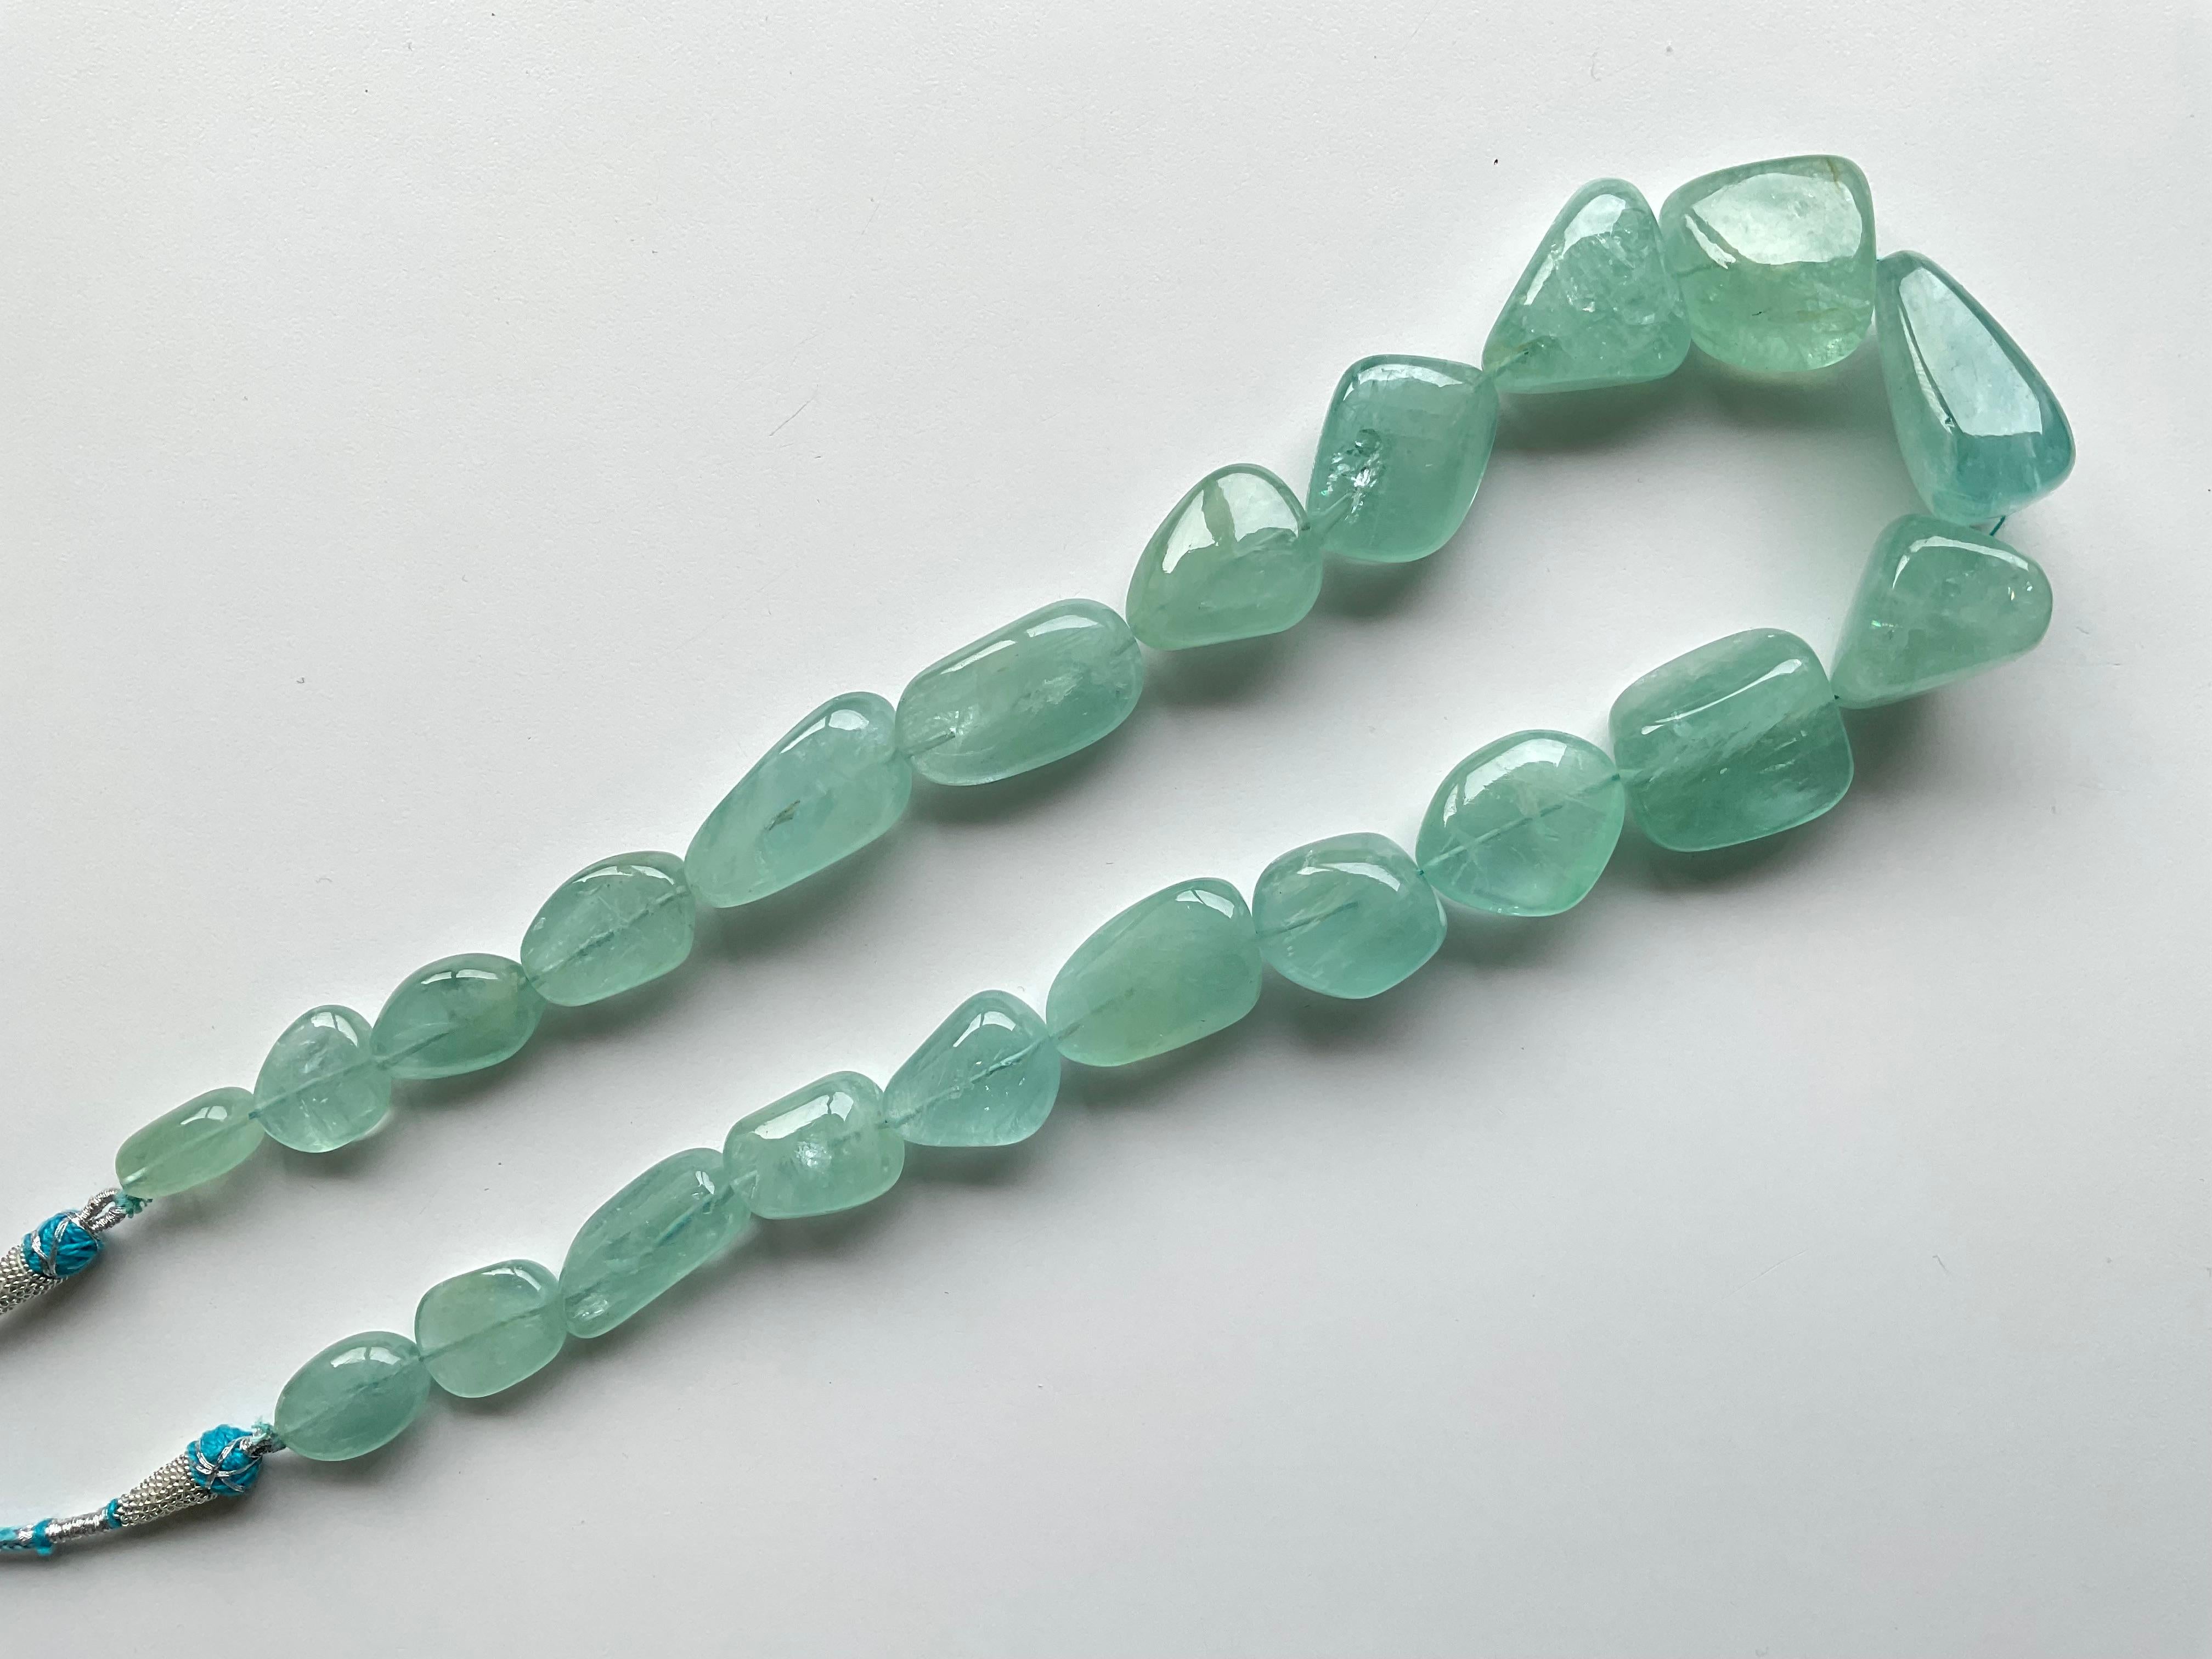 Women's or Men's 959.80 Carats Aquamarine Necklace Tumbled Plain Top Quality Natural Gemstone For Sale